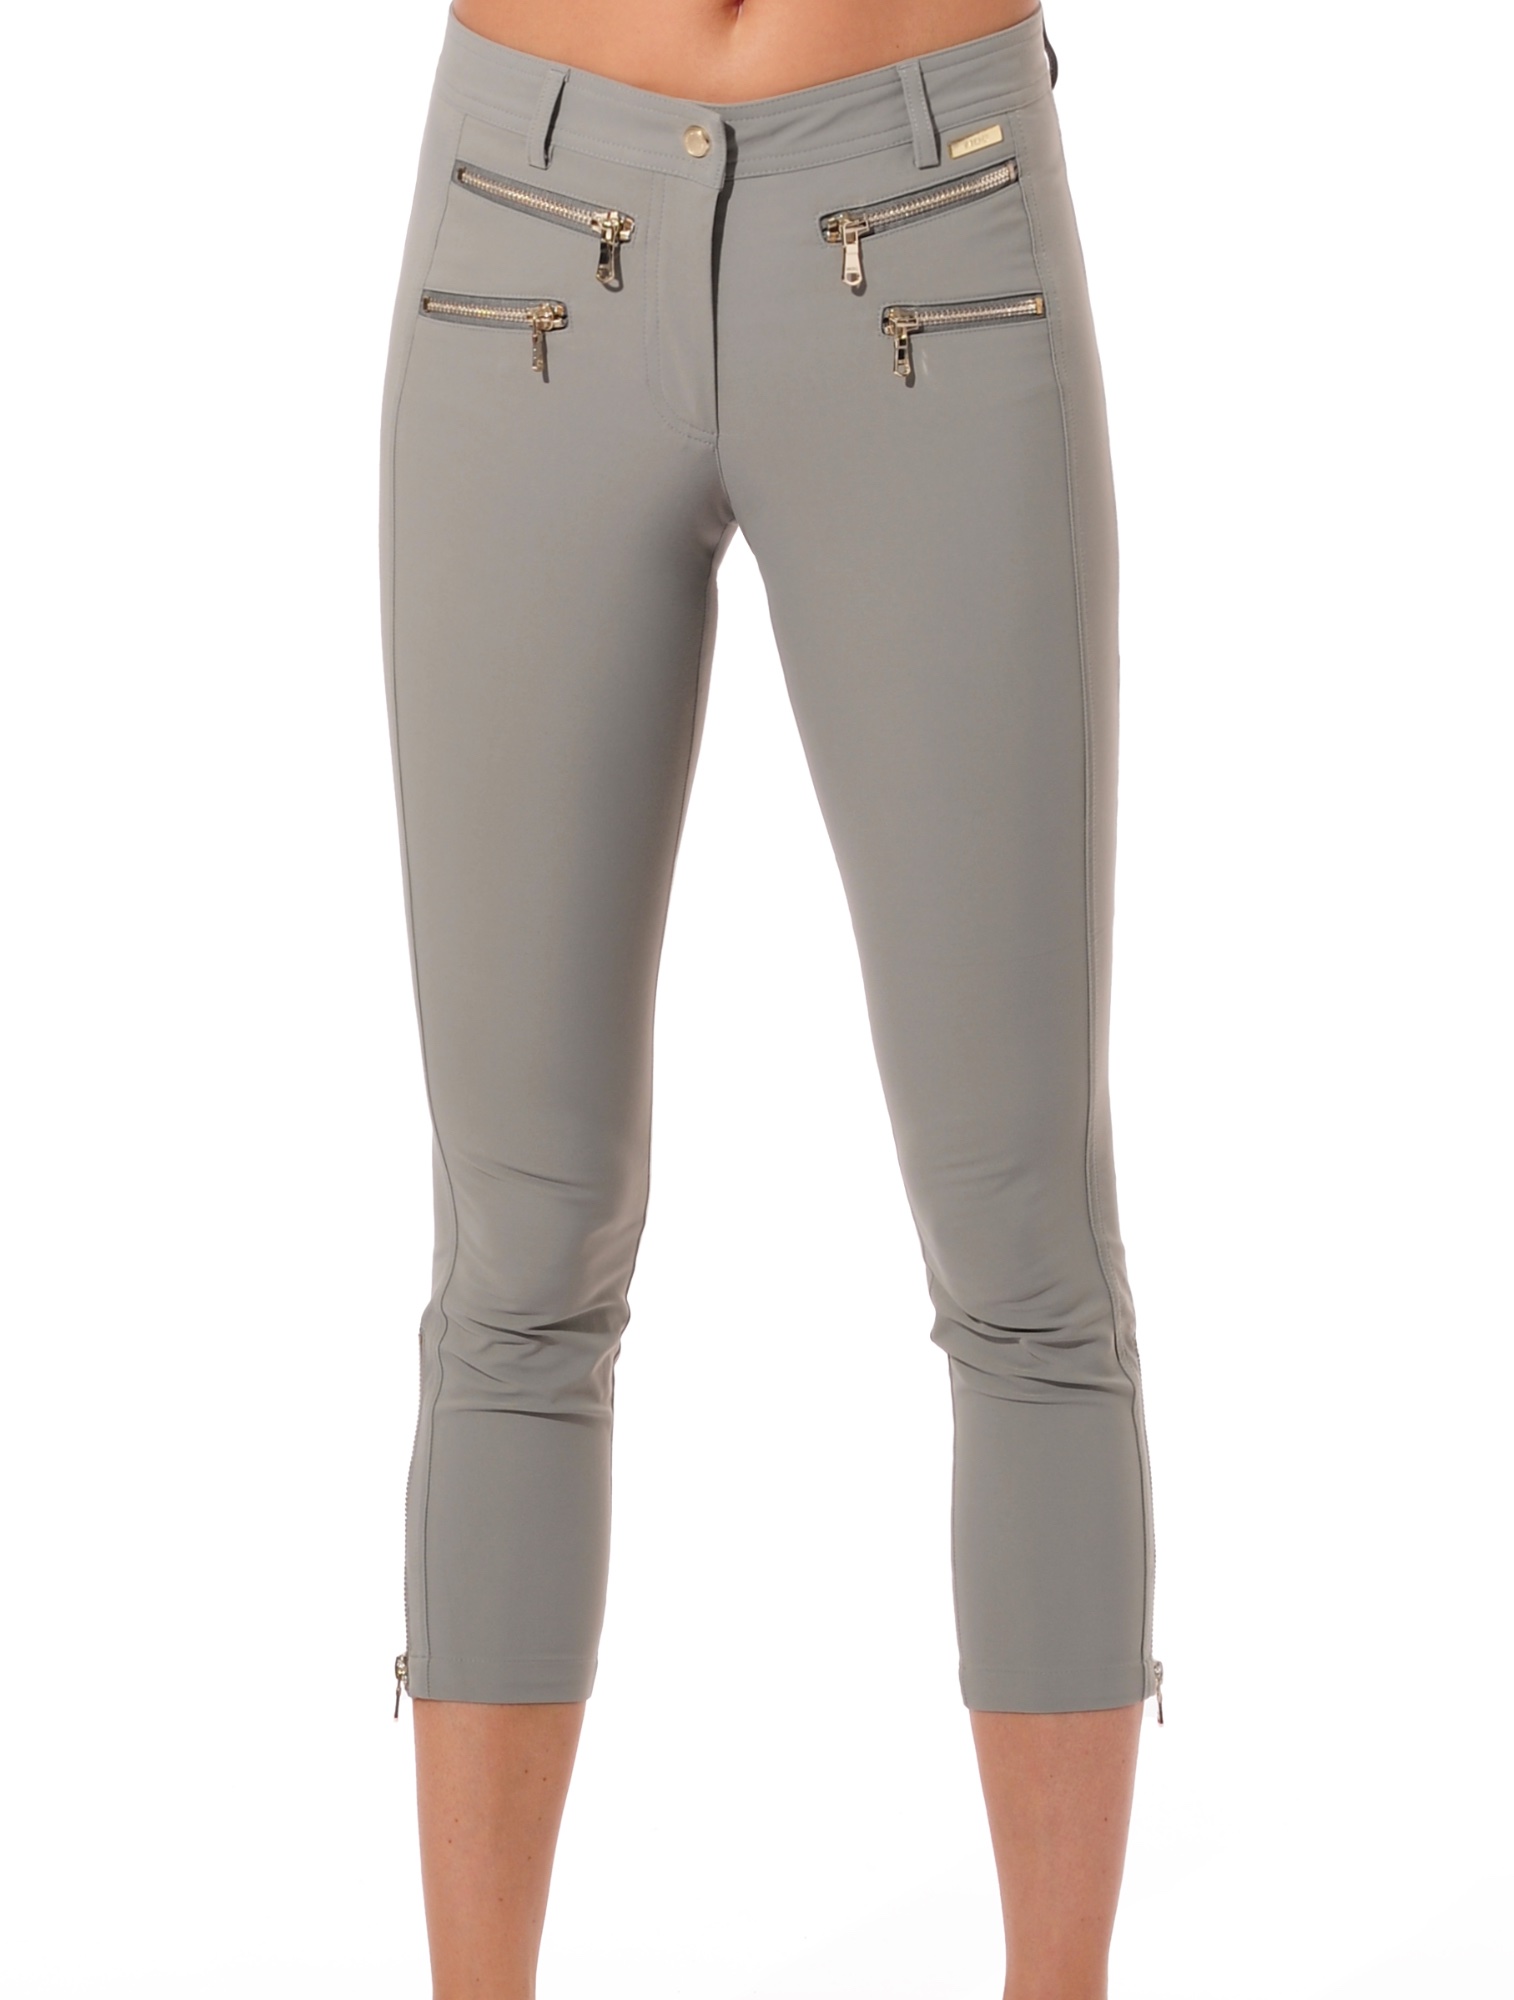 4way stretch double zip cropped pants jade 